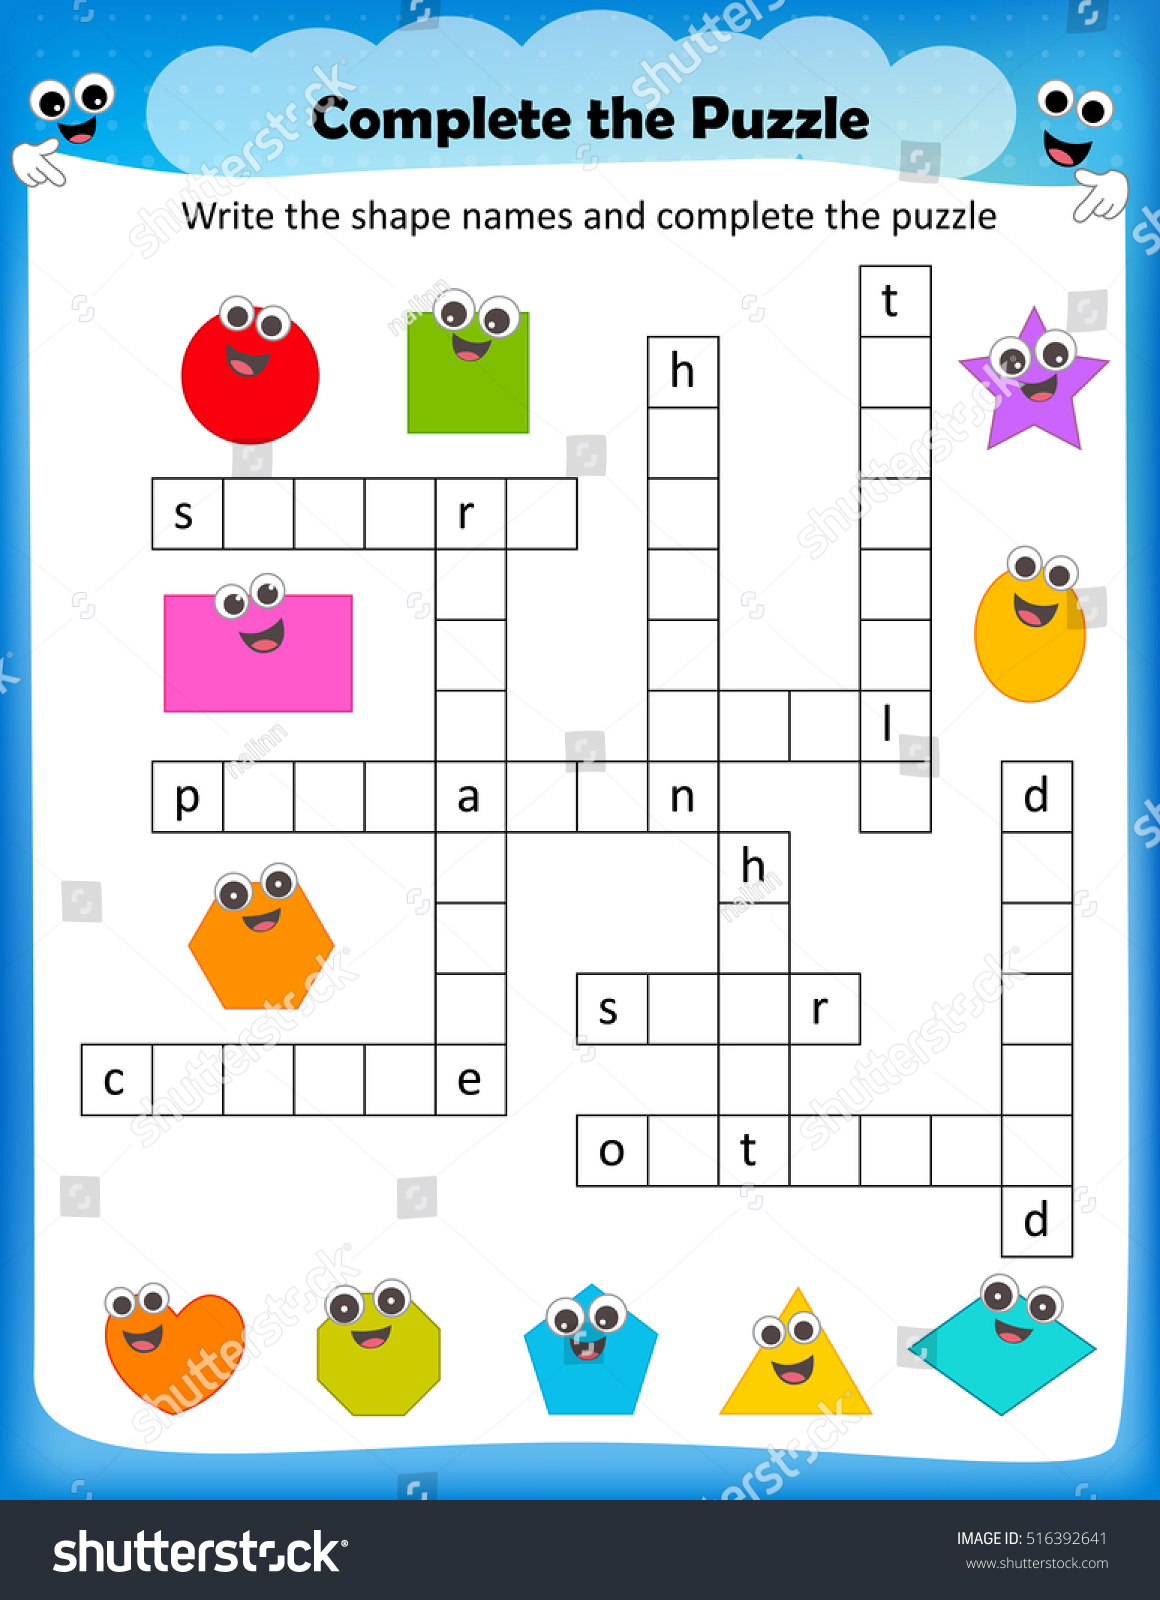 Complete the Crossword Body Parts Worksheet - Turtle Diary